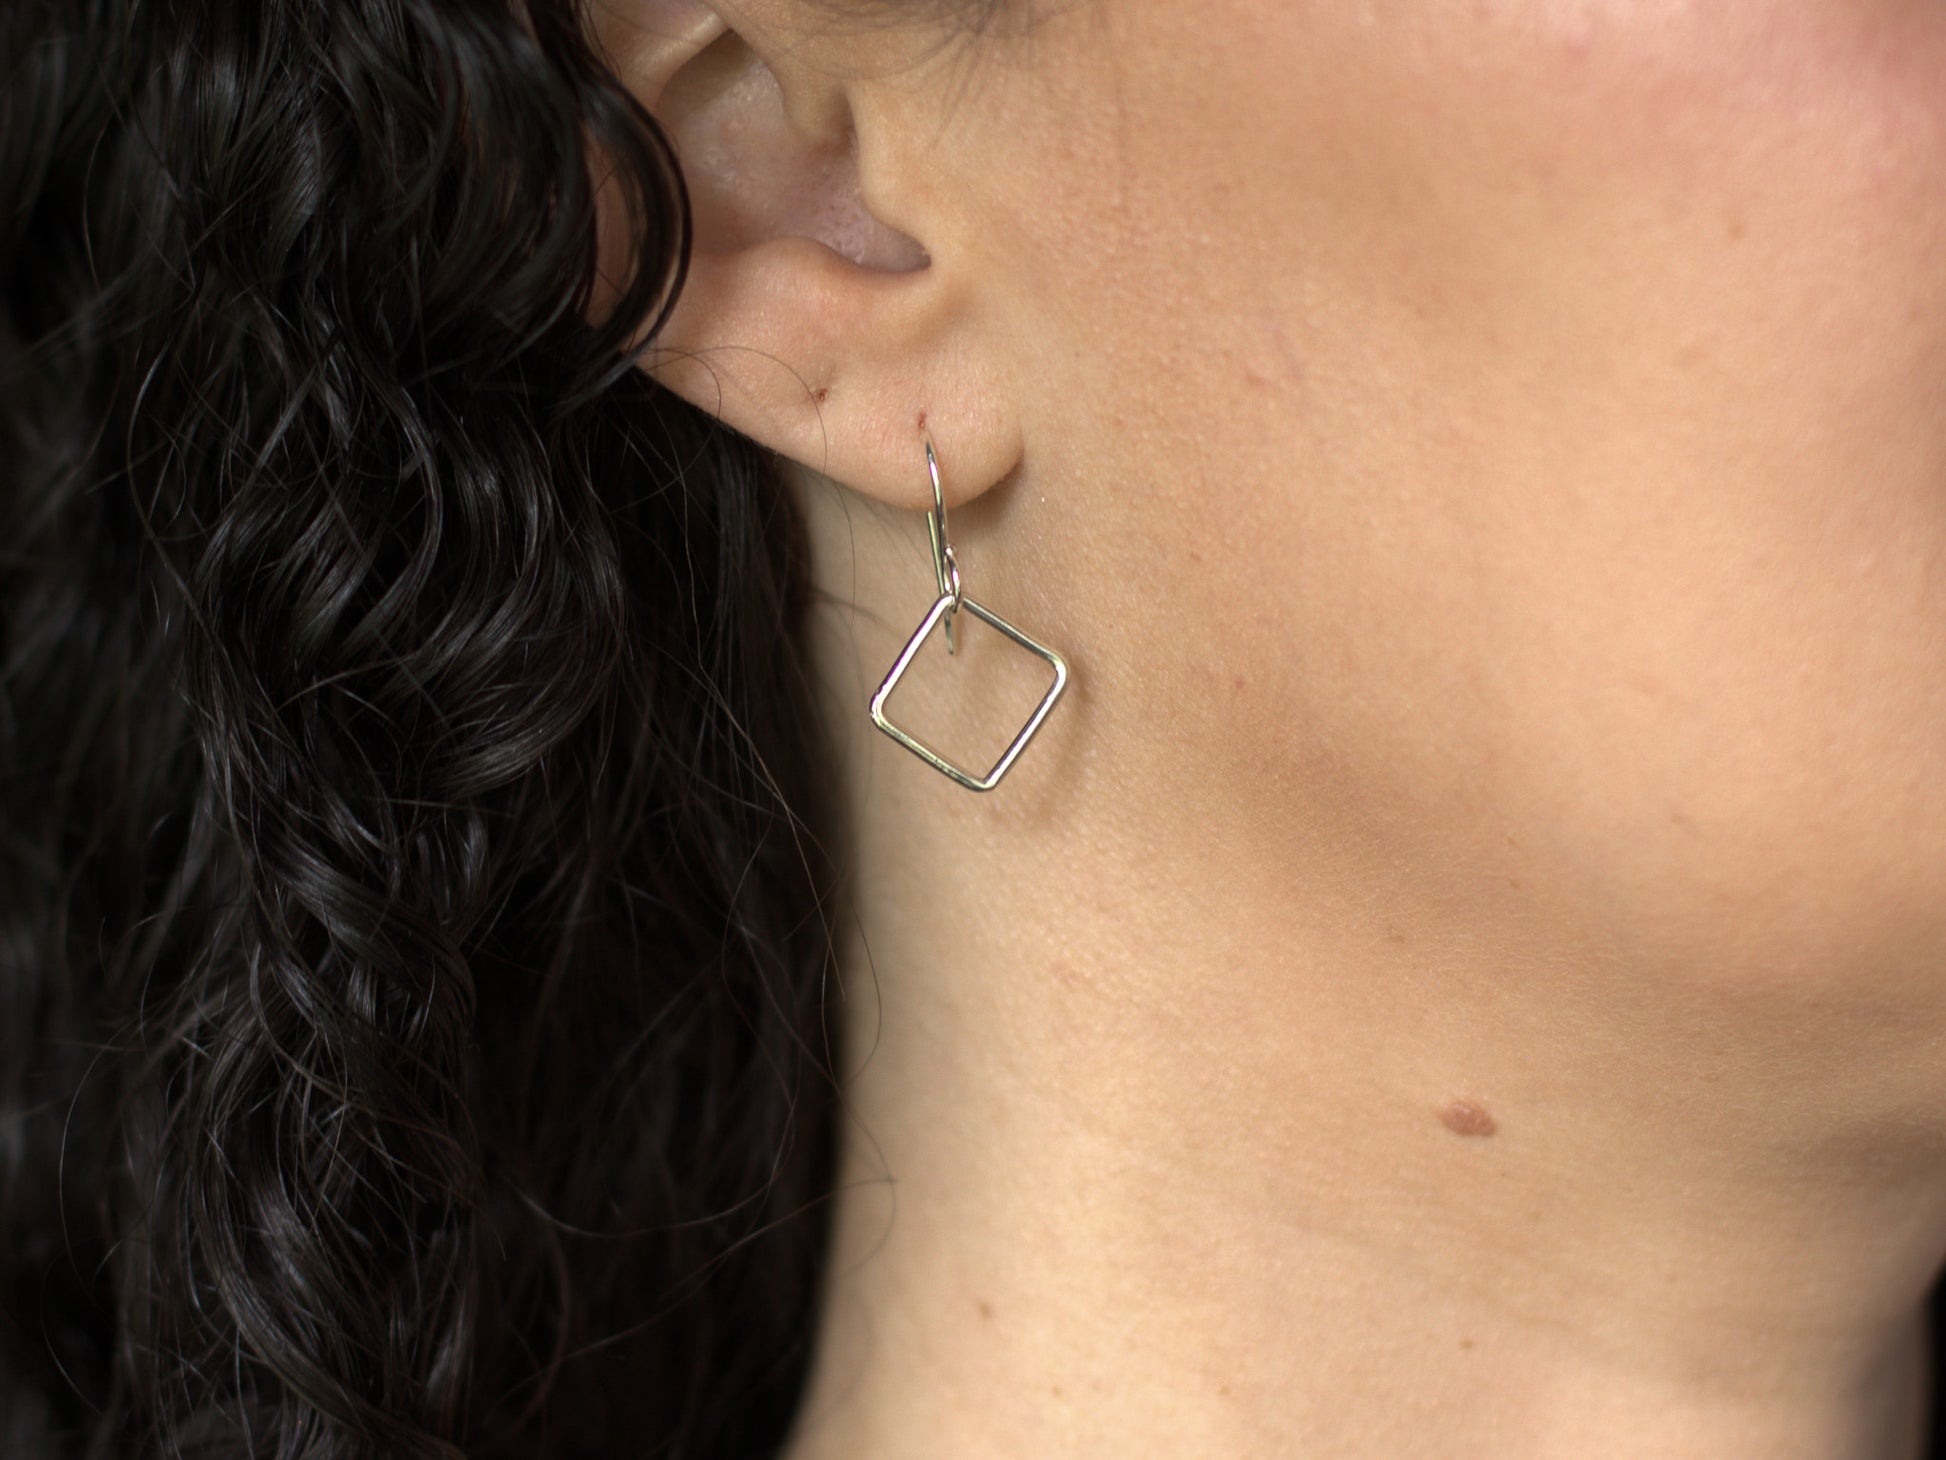 Practice Mindful Breathwork with our Box Breathing Earrings